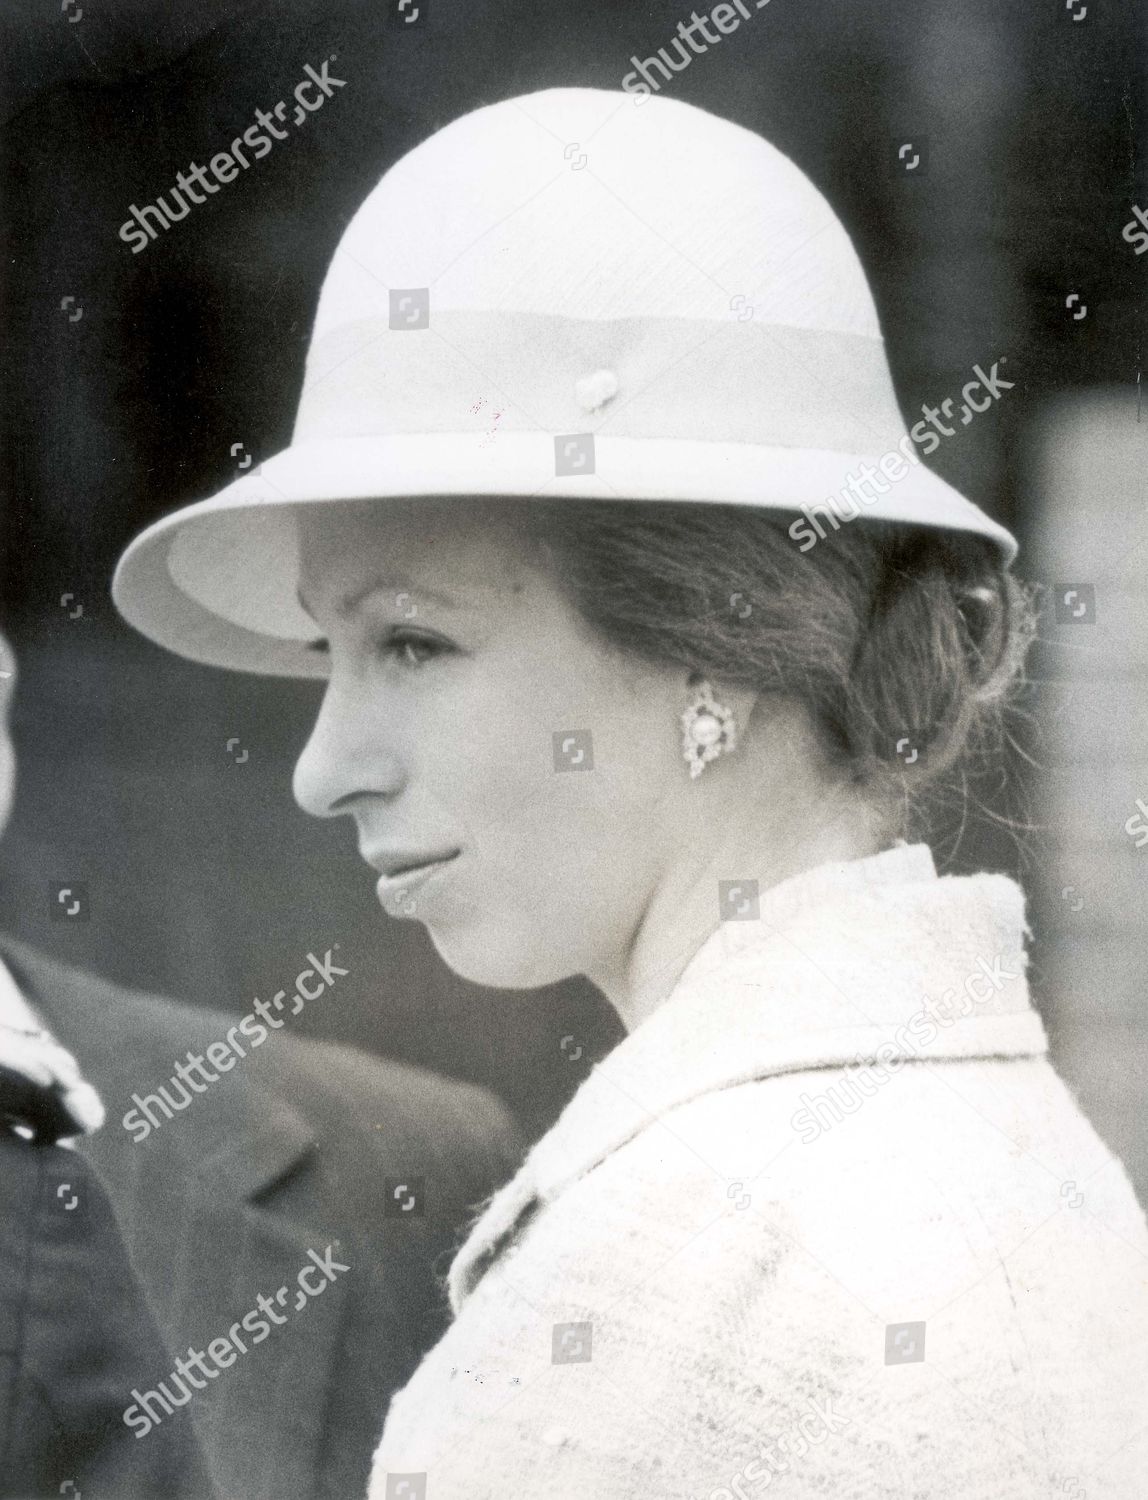 princess-anne-now-princess-royal-1979-picture-shows-princess-anne-whilst-in-manchester-where-she-opened-the-new-arndale-shoppping-centre-shutterstock-editorial-891822a.jpg